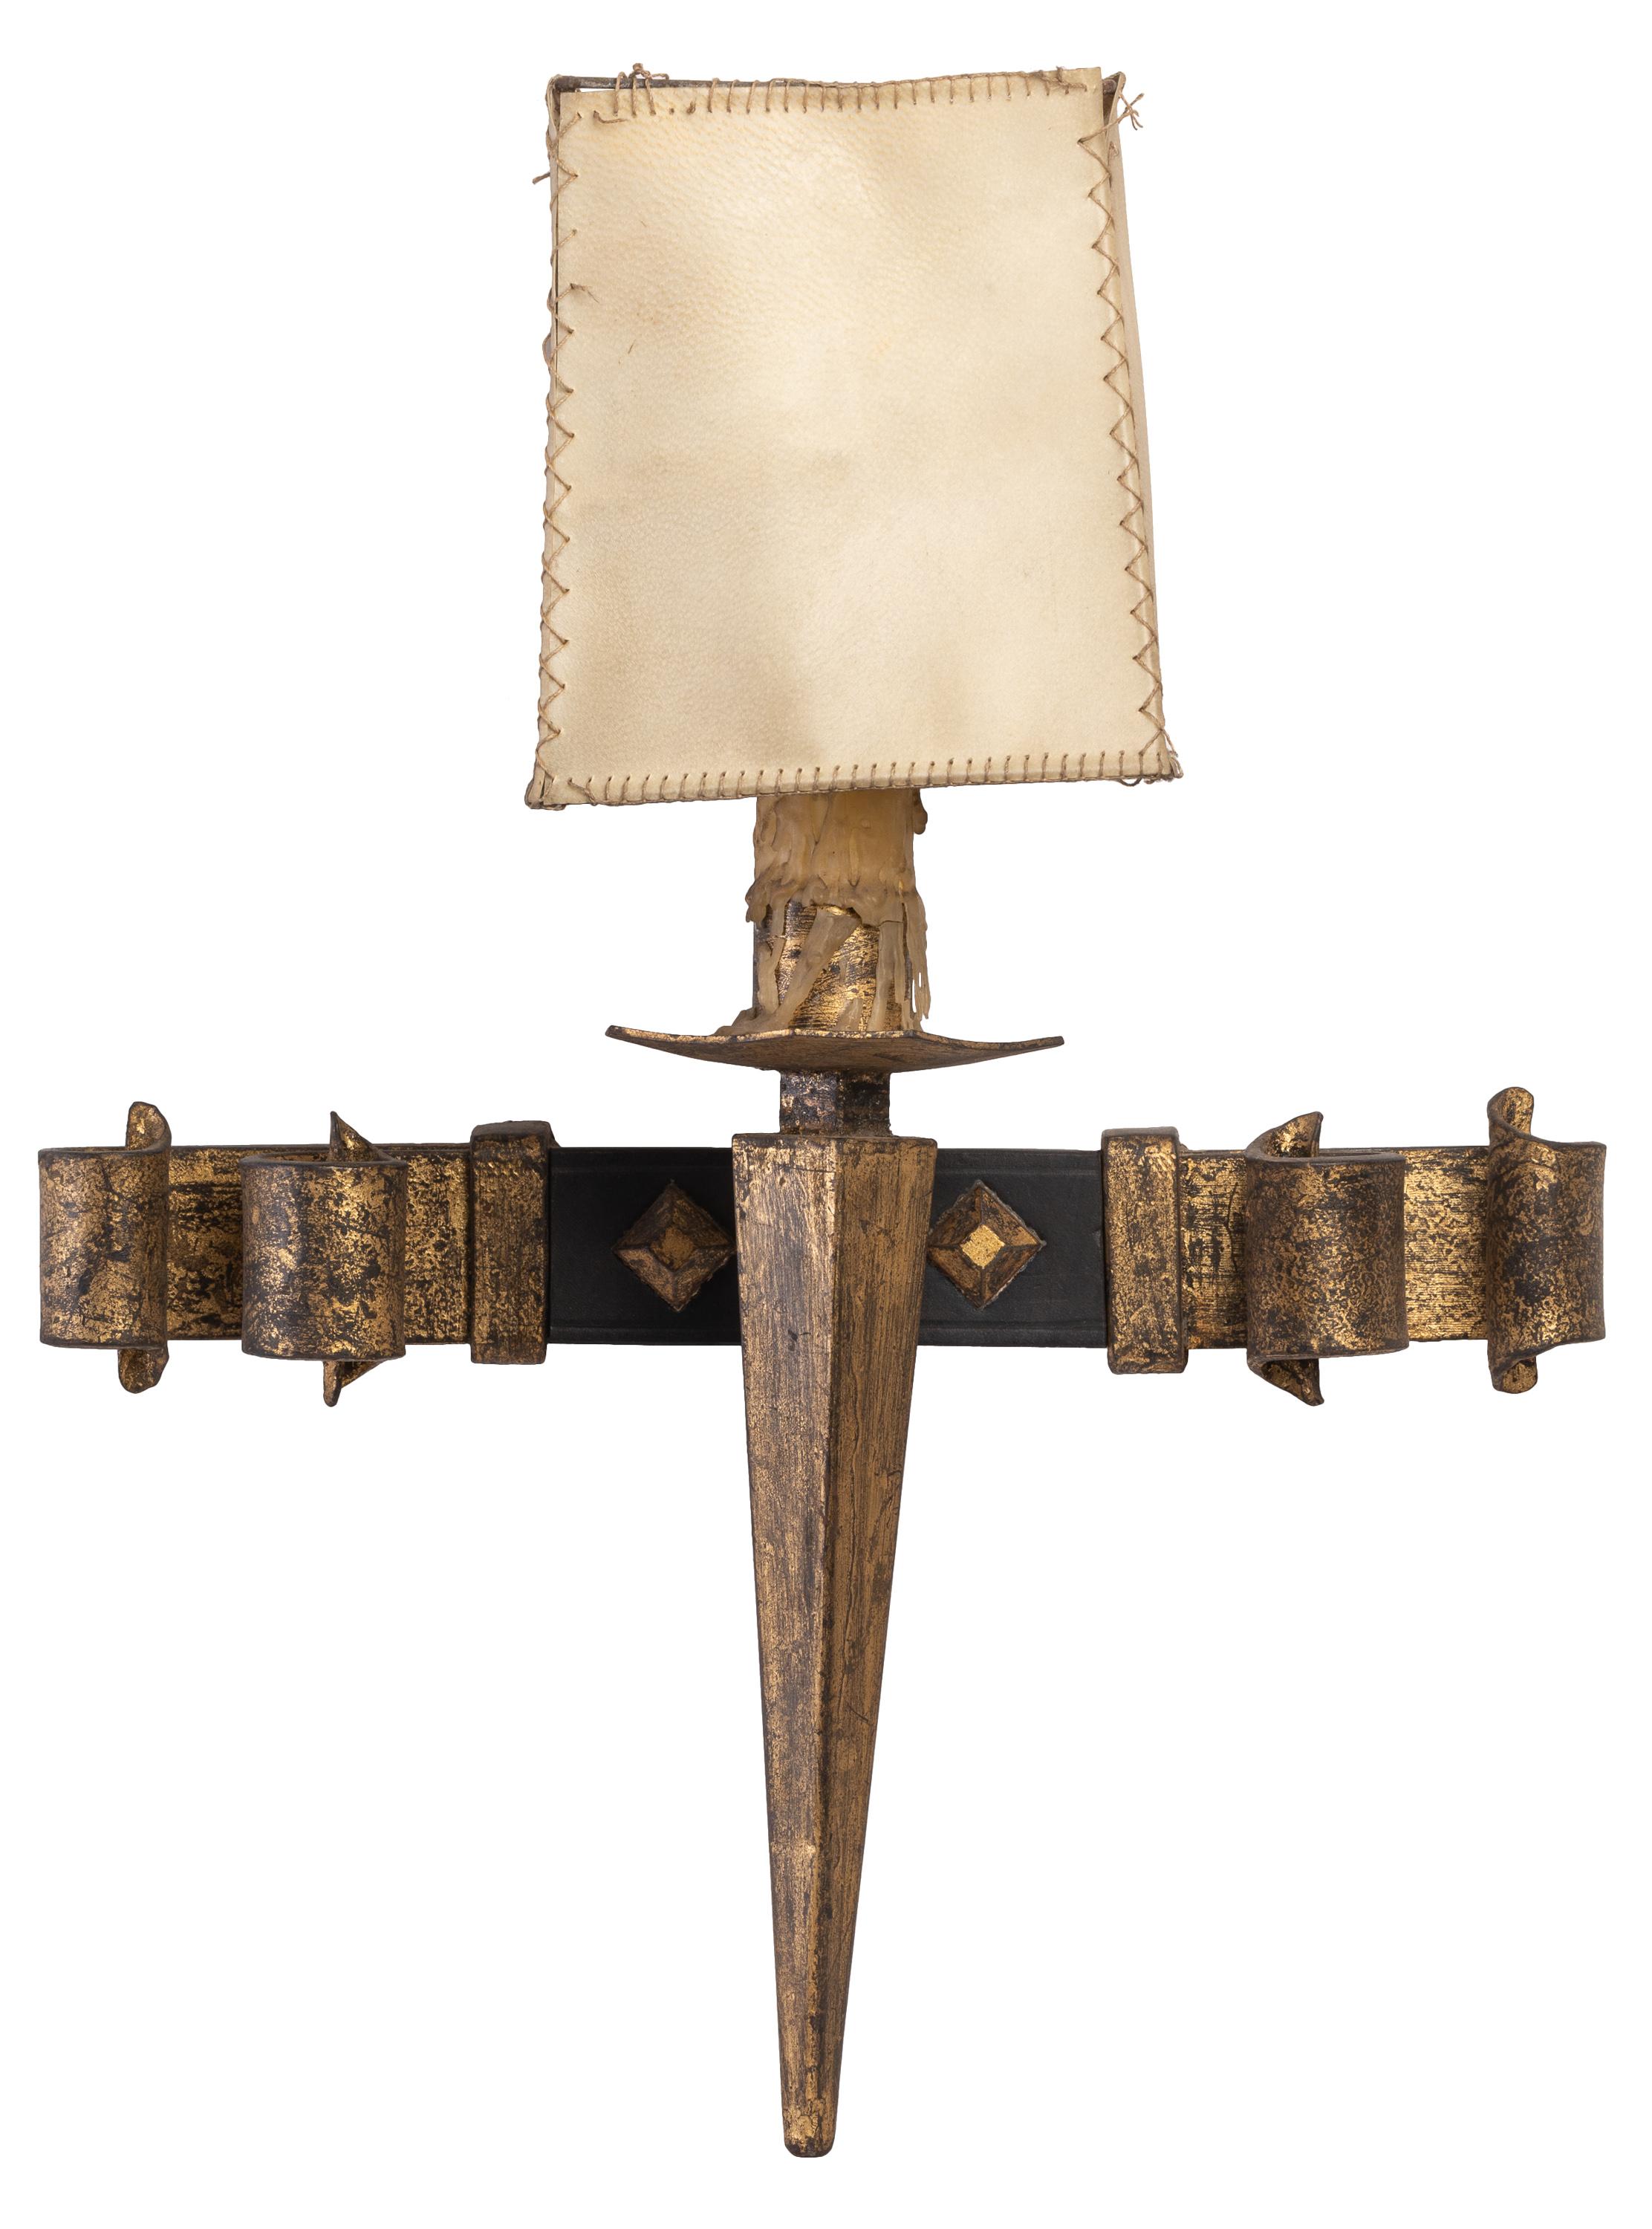 Parchment Paper Set of 12 Neo-Gothic Medieval Style Iron Wall Sconces with Parchment Shades For Sale